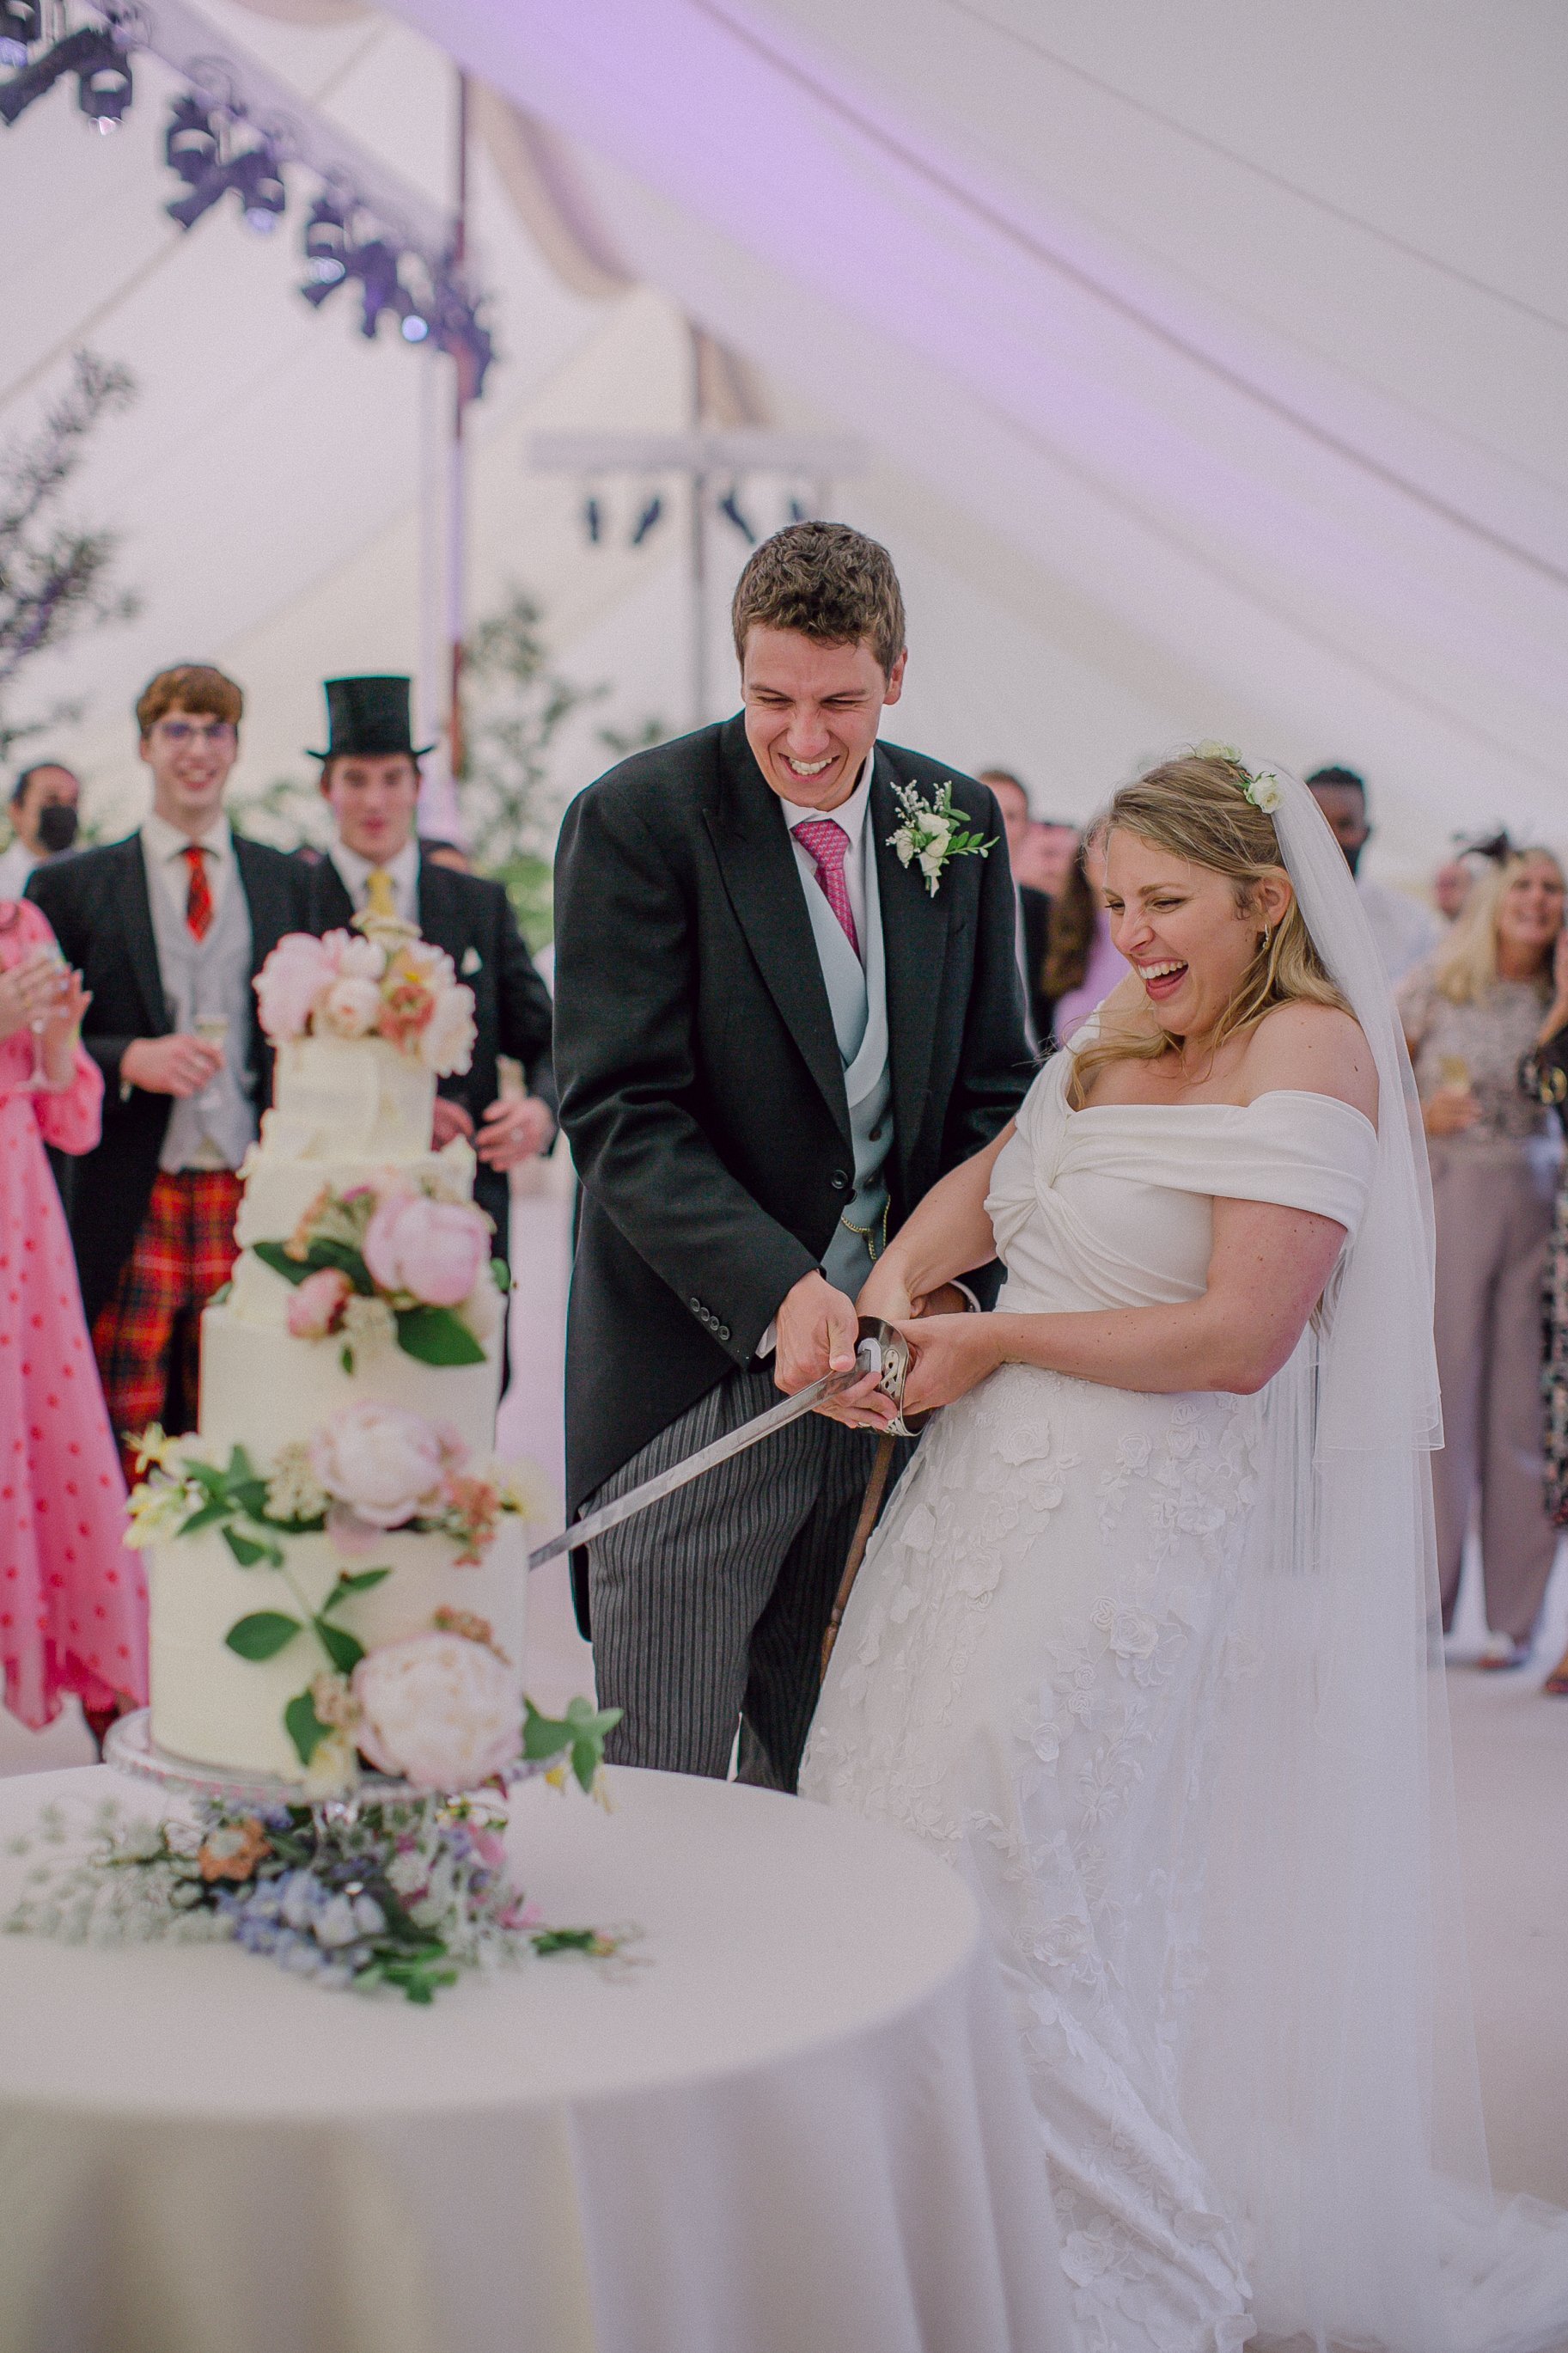 Beautiful bride Lucy wore a wedding dress by Halfpenny London